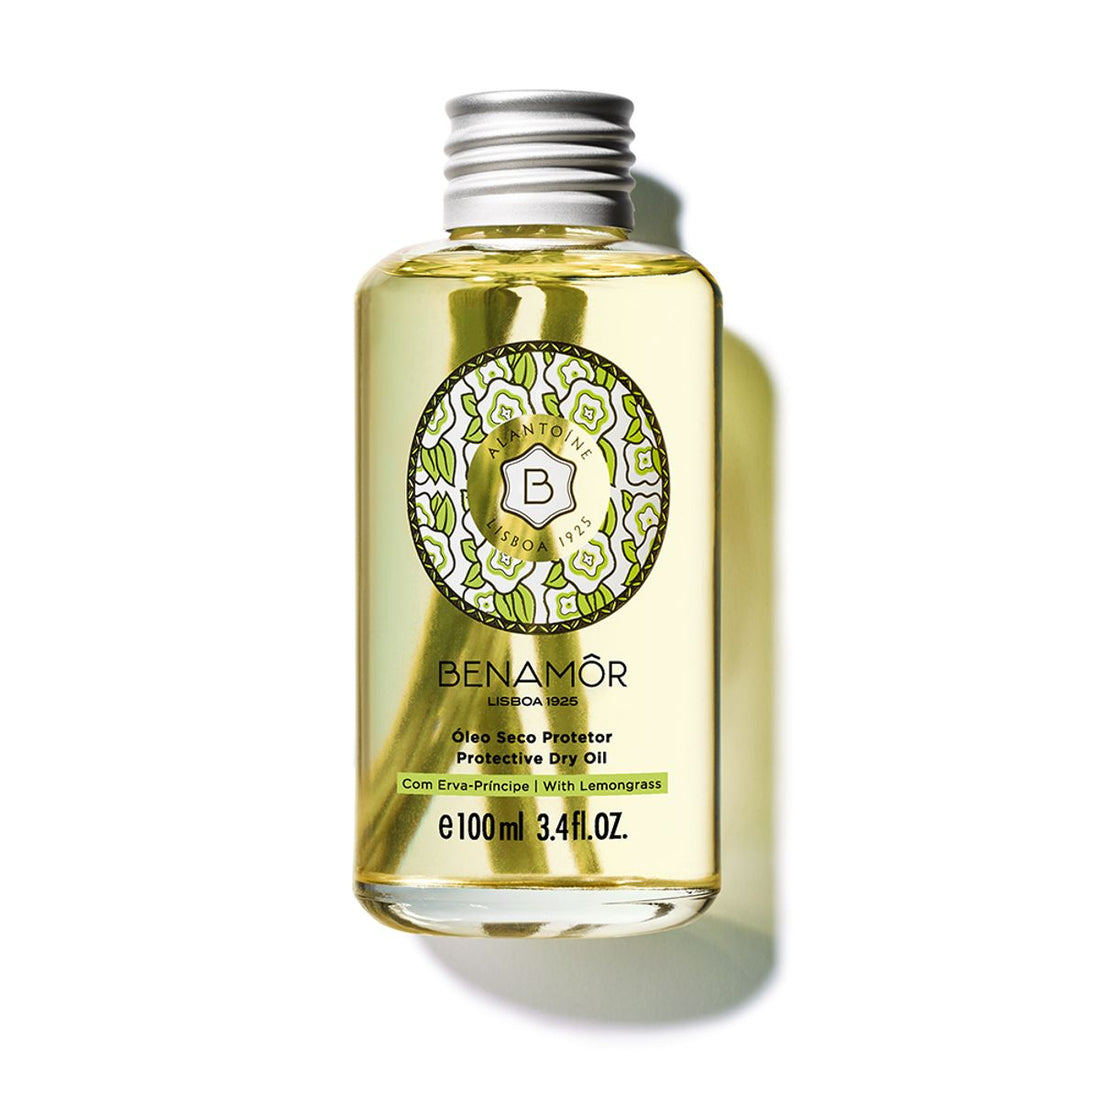 The miracle Dry oil 100 ml